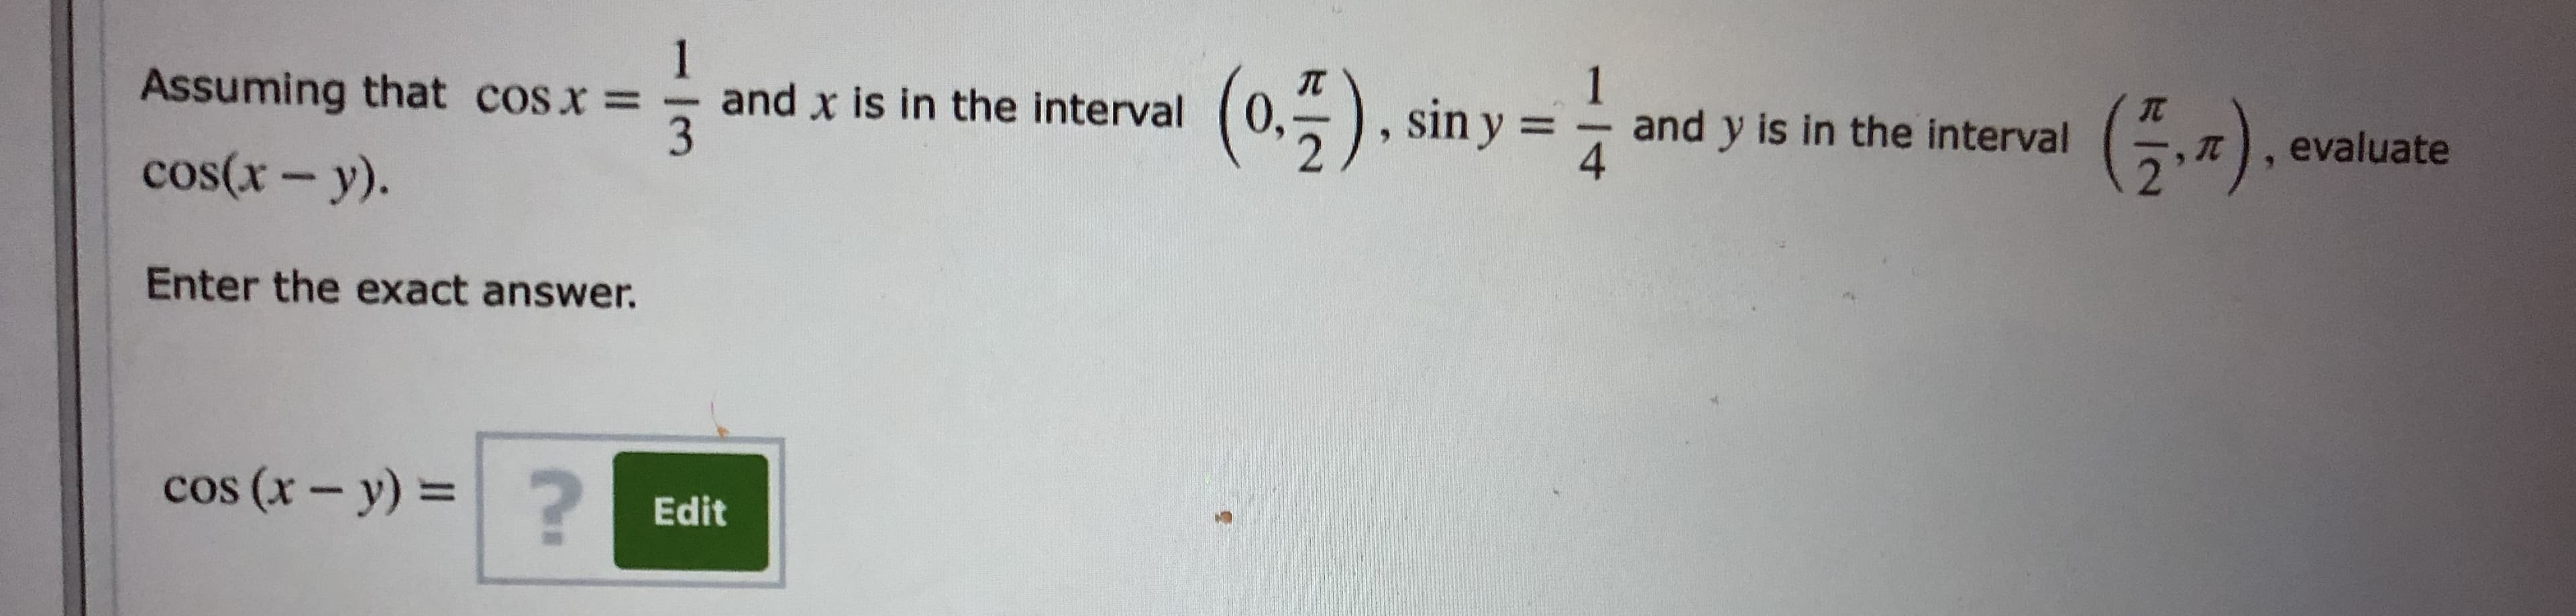 1
and x is in the interval
1
and y is in the interval
(0.5). sin y =
(5-).
Assuming that cosx =
י) . erluate
%3D
cos(x – y).
Enter the exact answer.
cos (x - y) =?
%3D
Edit
